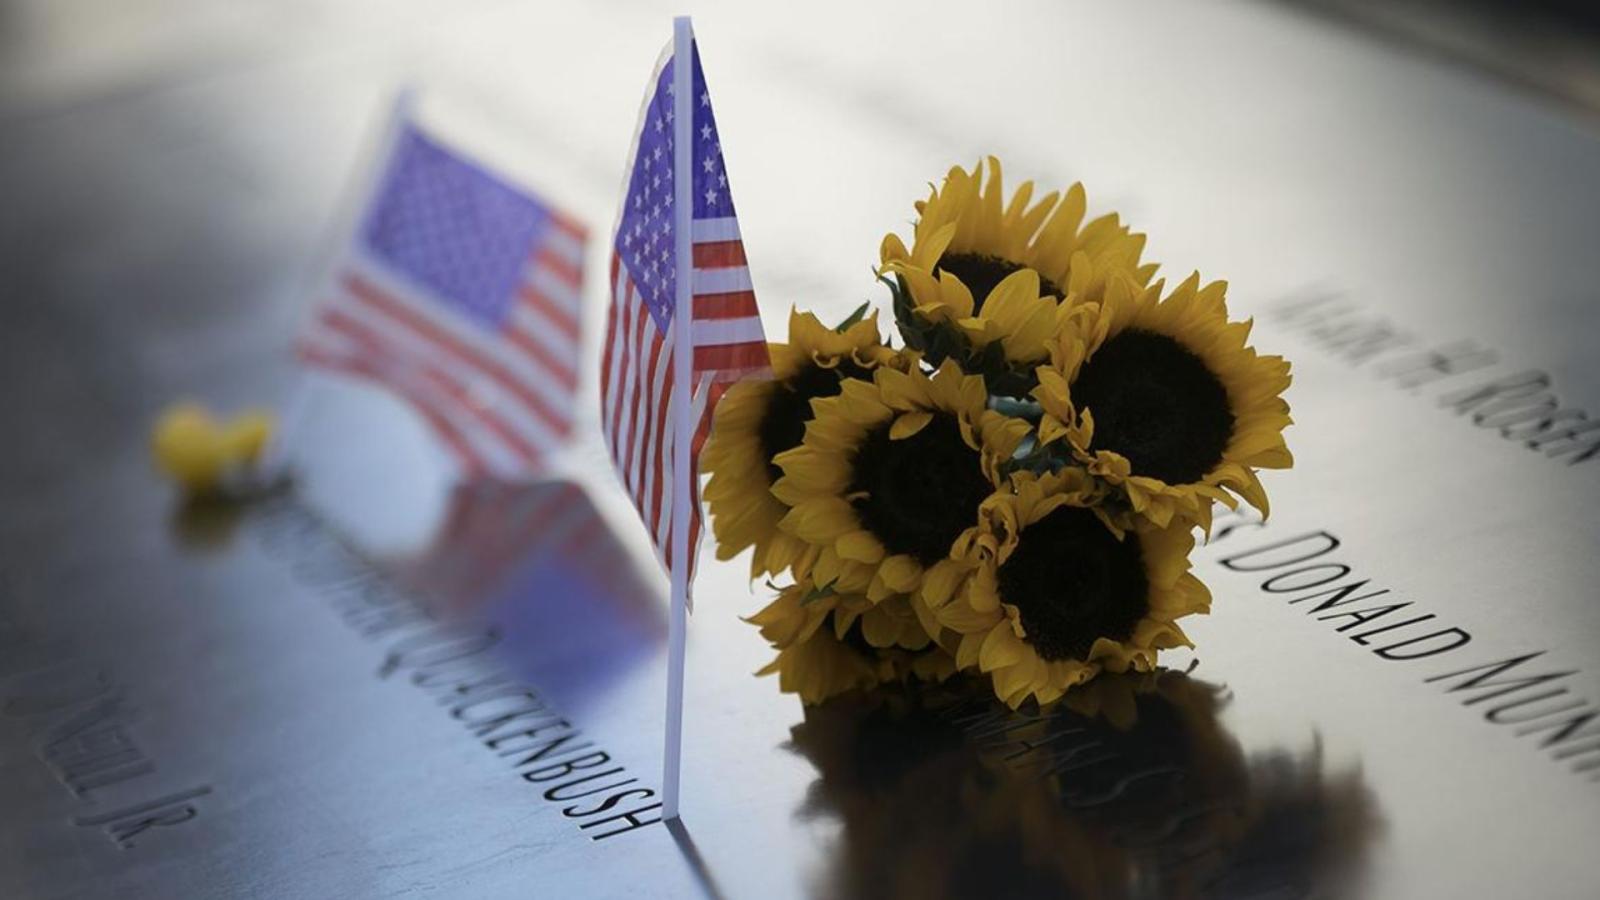 Sunflowers and American flags on the Memorial